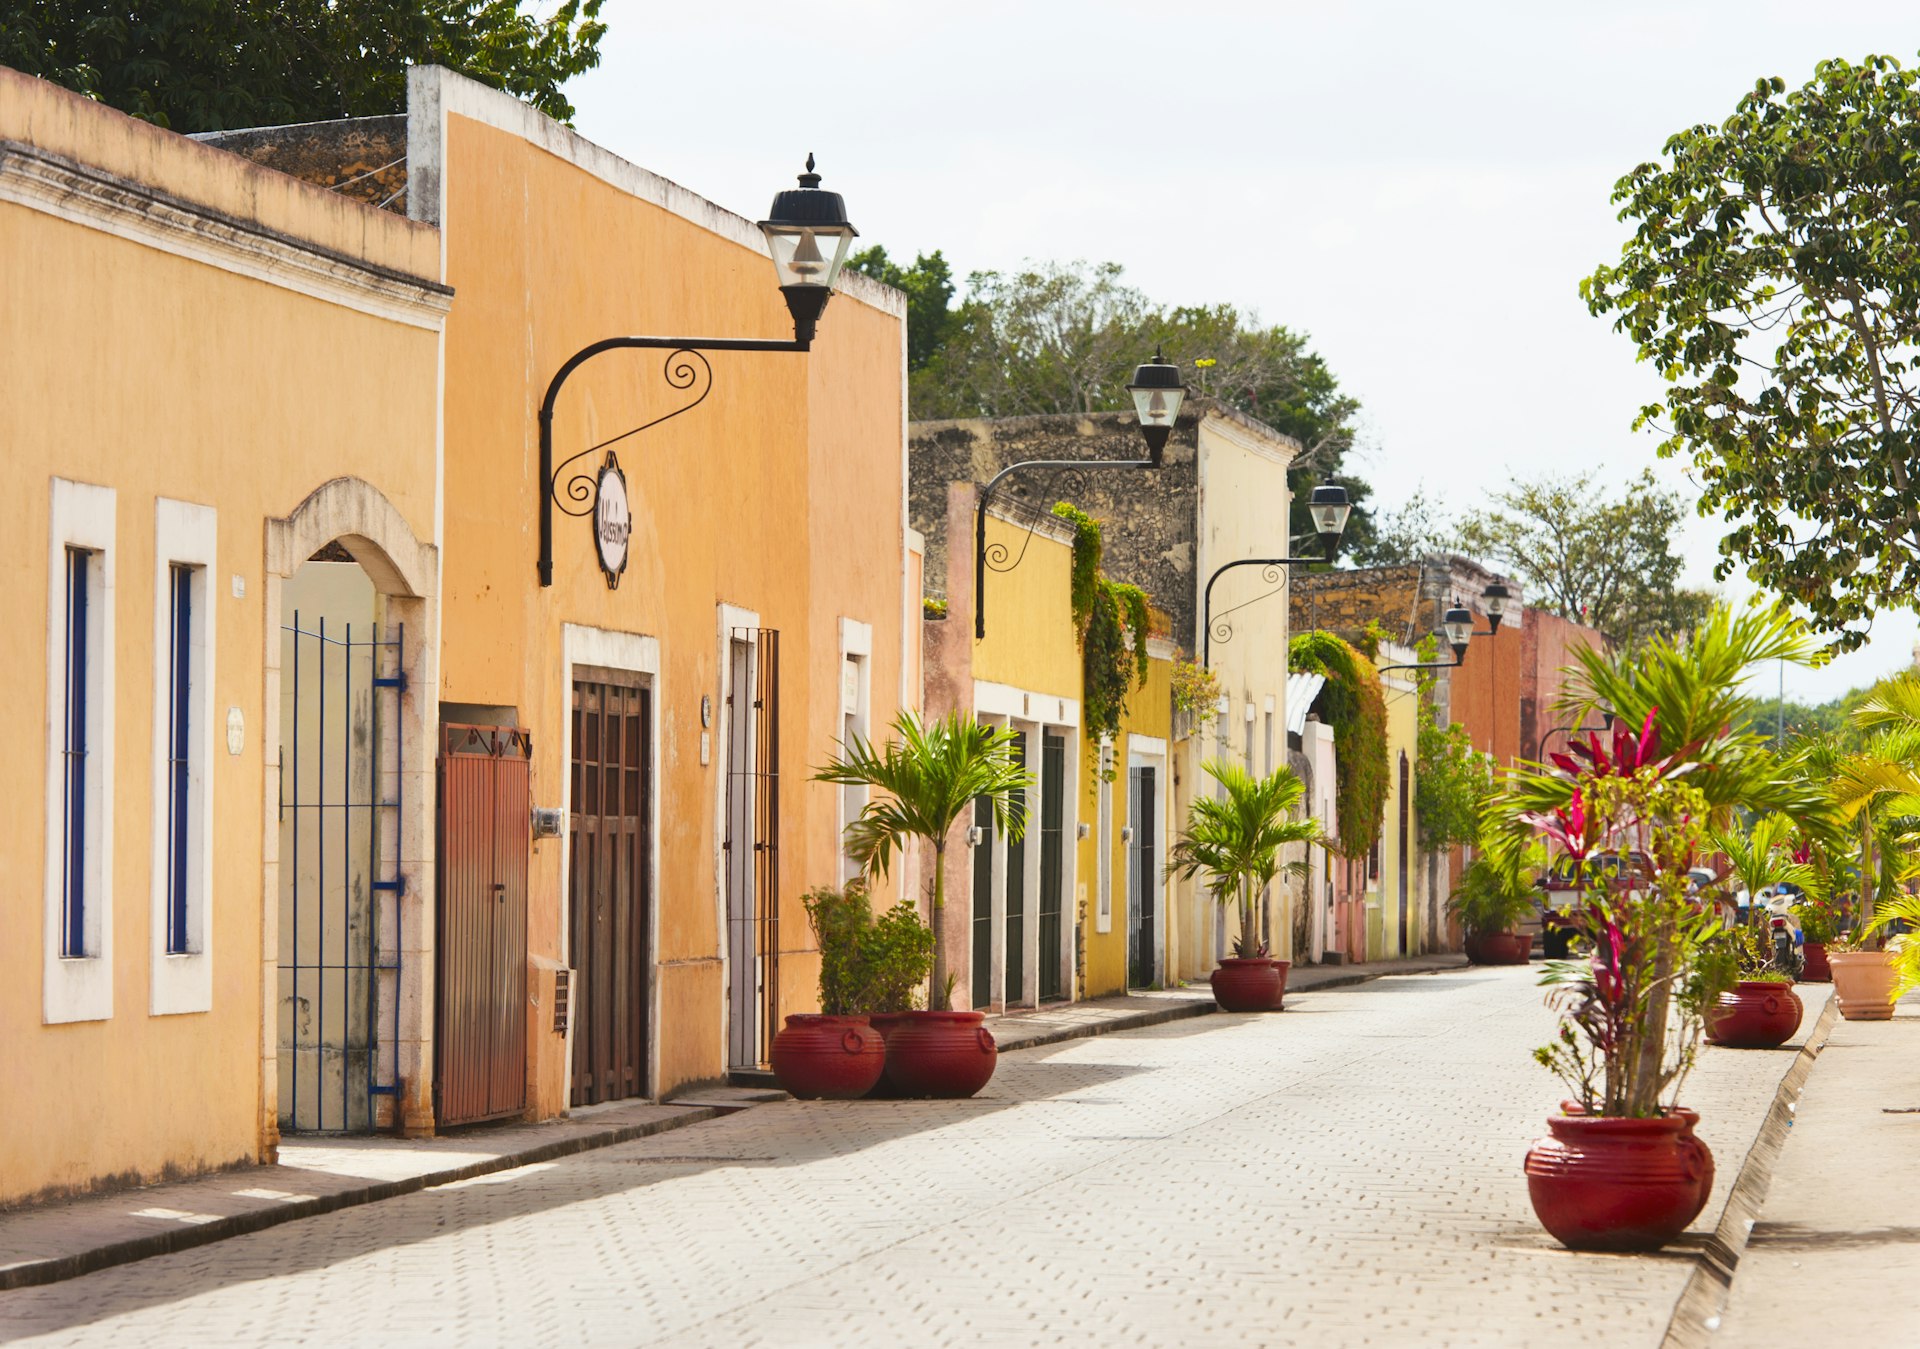 Colourful buildings on a street in Valladolid, Yucatan, Mexico